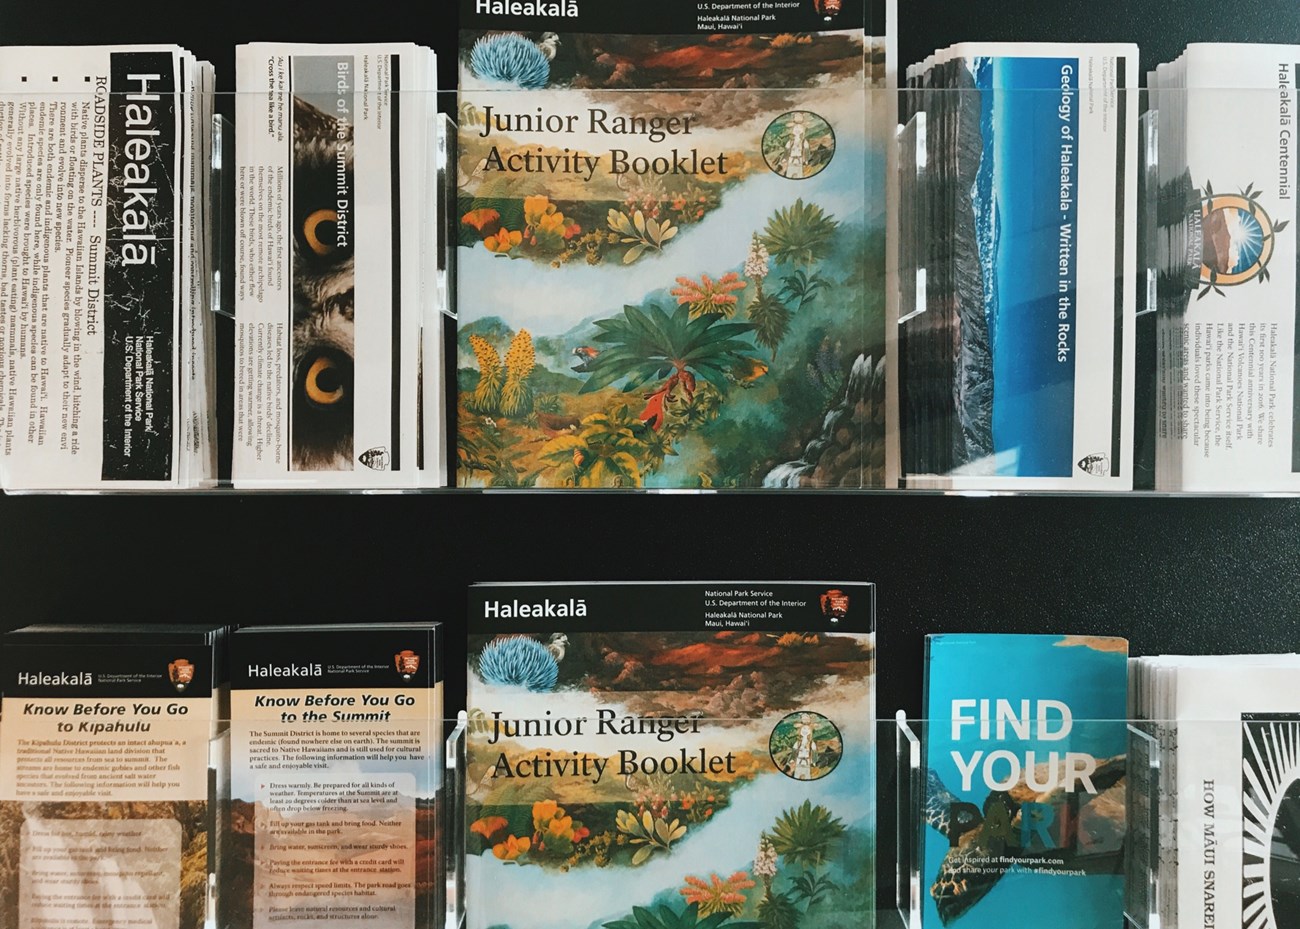 A rack of brochures available at the visitor centers.